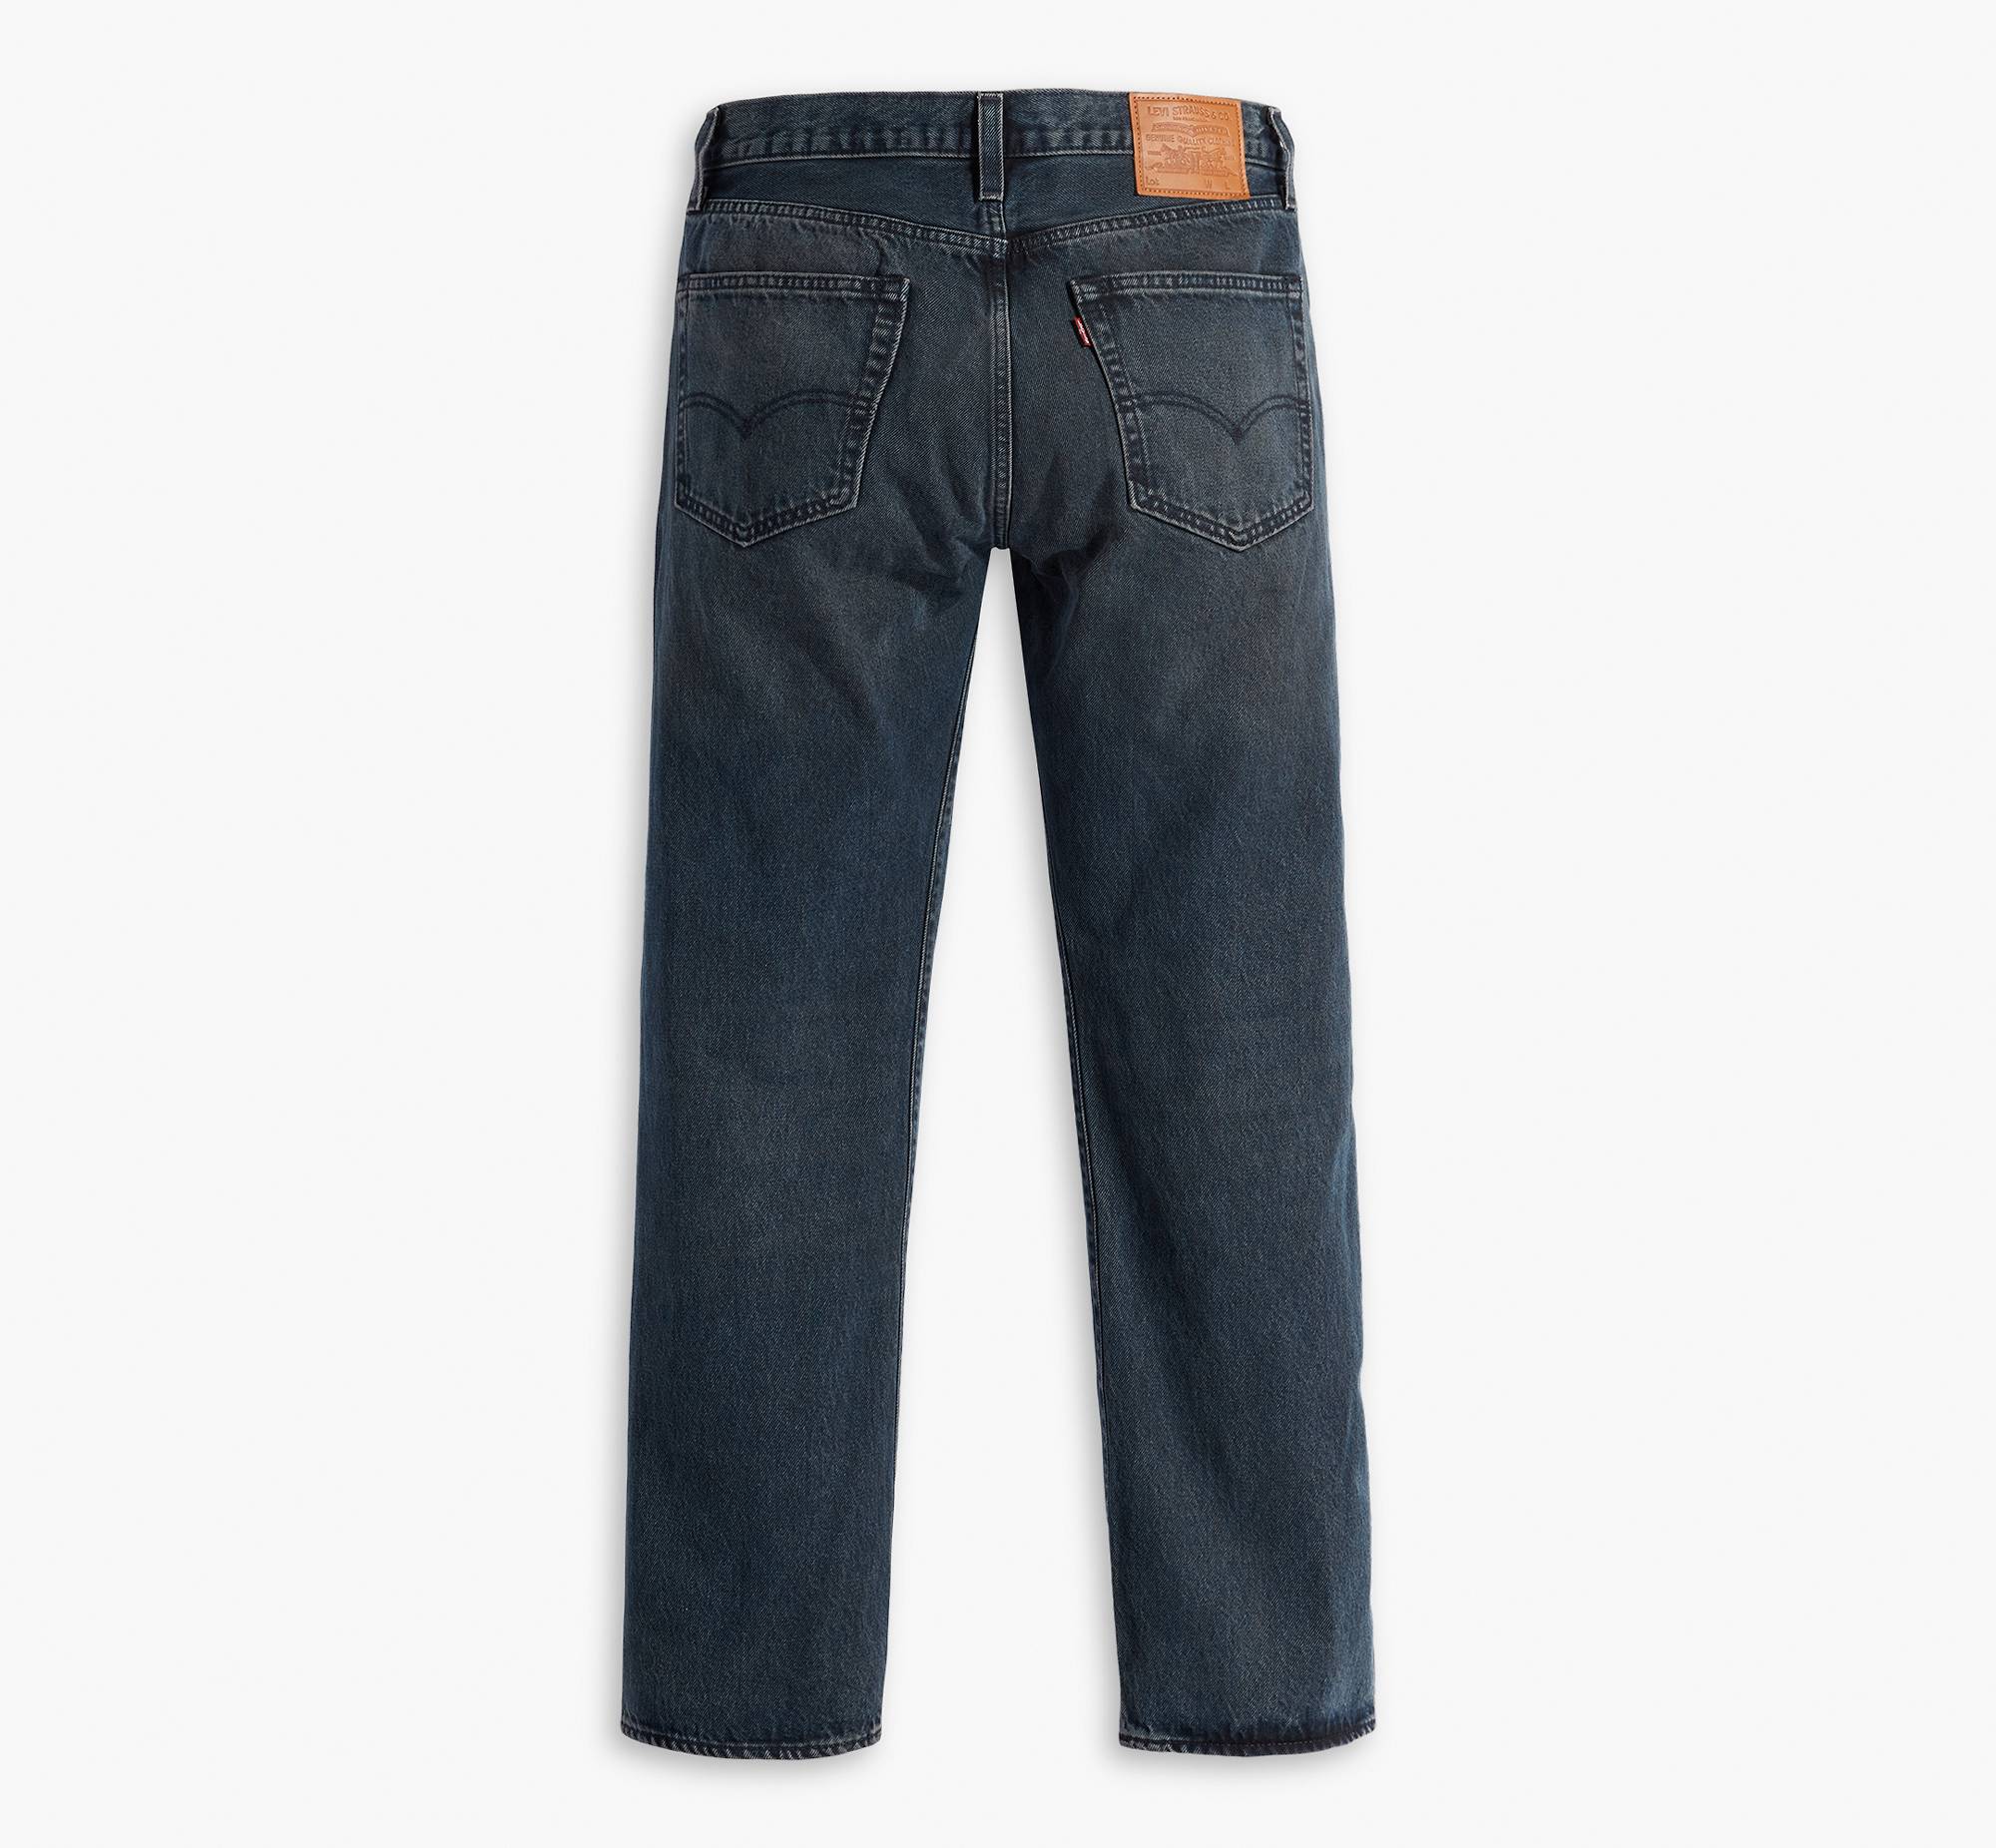 551Z™ Authentic Straight Jeans 7